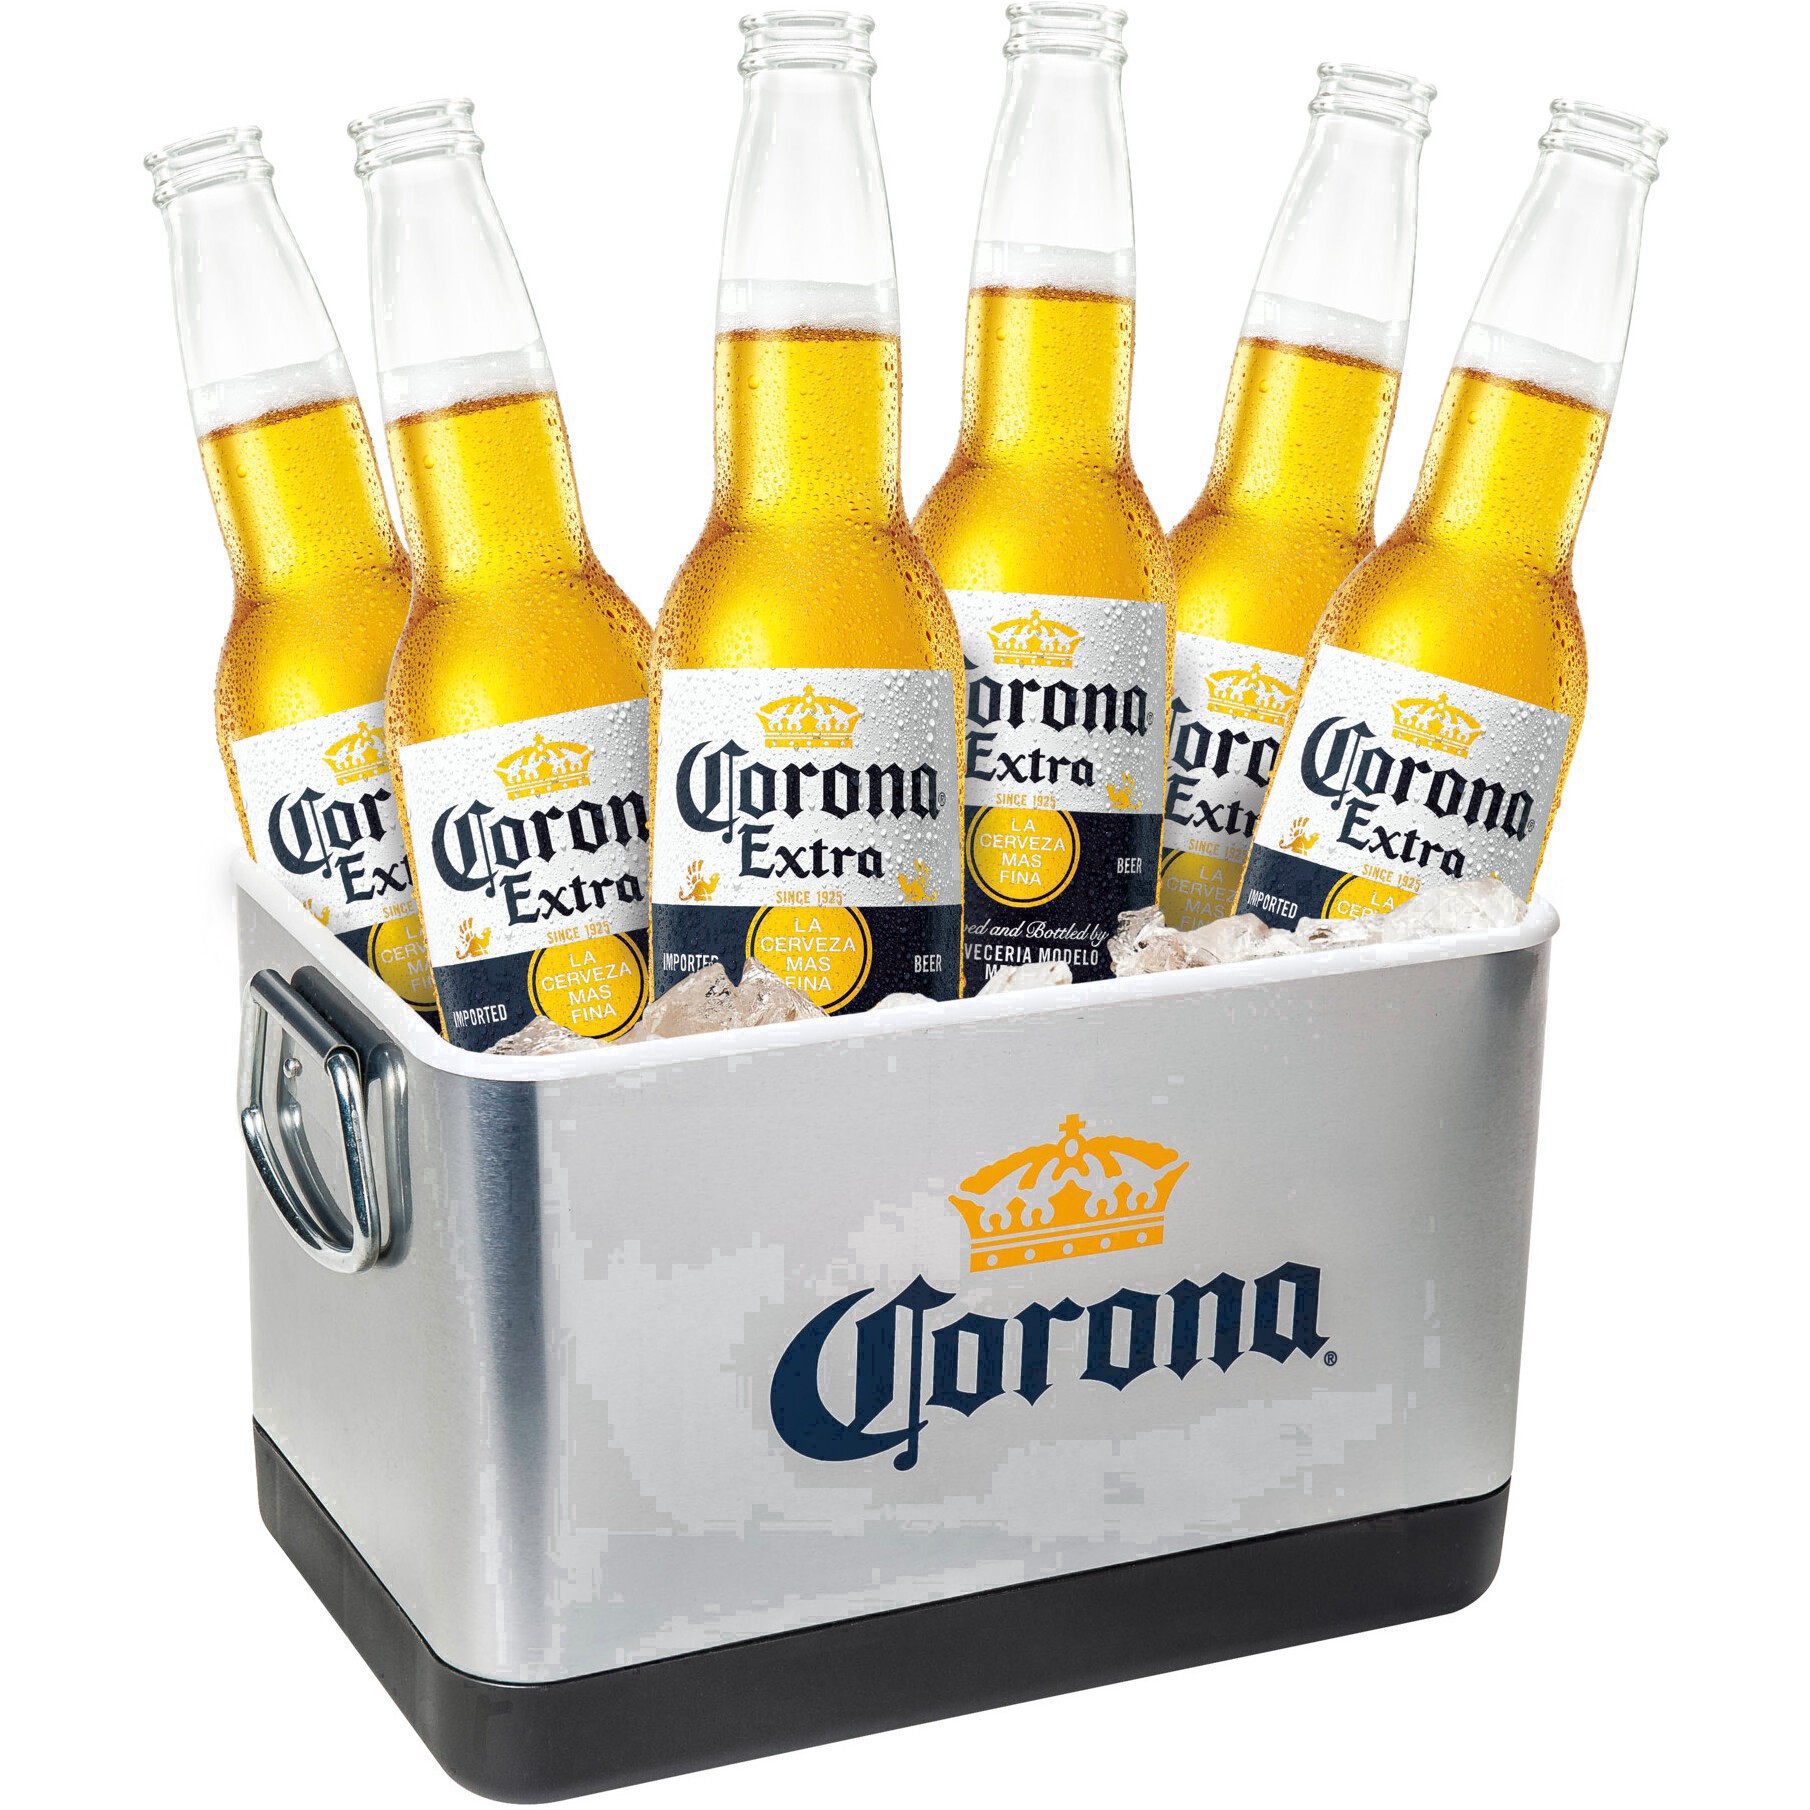 slide 50 of 98, Corona Extra Lager Mexican Beer Bottles, 12 oz